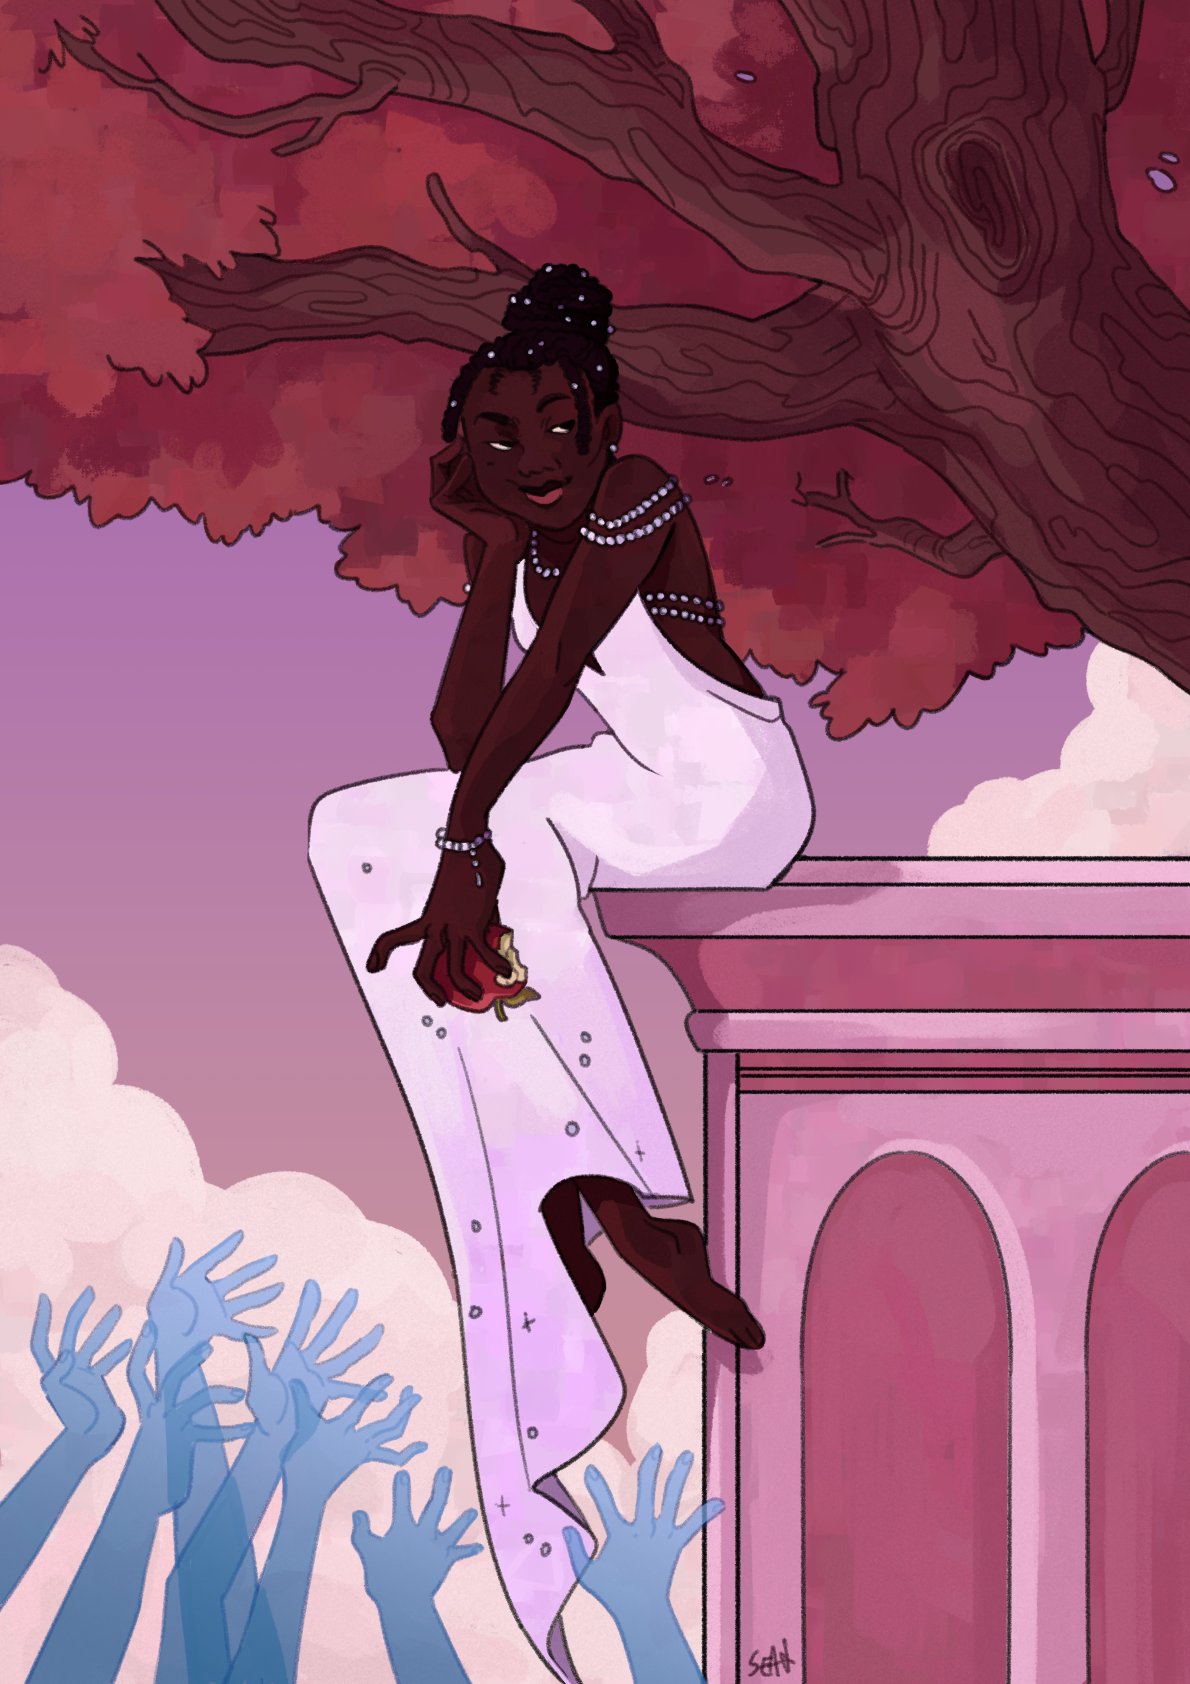 A digital drawing of a thin, dark-skinned Black woman sitting with her legs crossed on the edge of a stone plinth. She's holding a half-eaten apple in one hand and smirking slightly. She's wearing a white backless gown and pearl jewelry, and her hair is pulled into a bun and decorated with pearls. Below her, the ghostly blue hands of the dead reach up towards her feet.